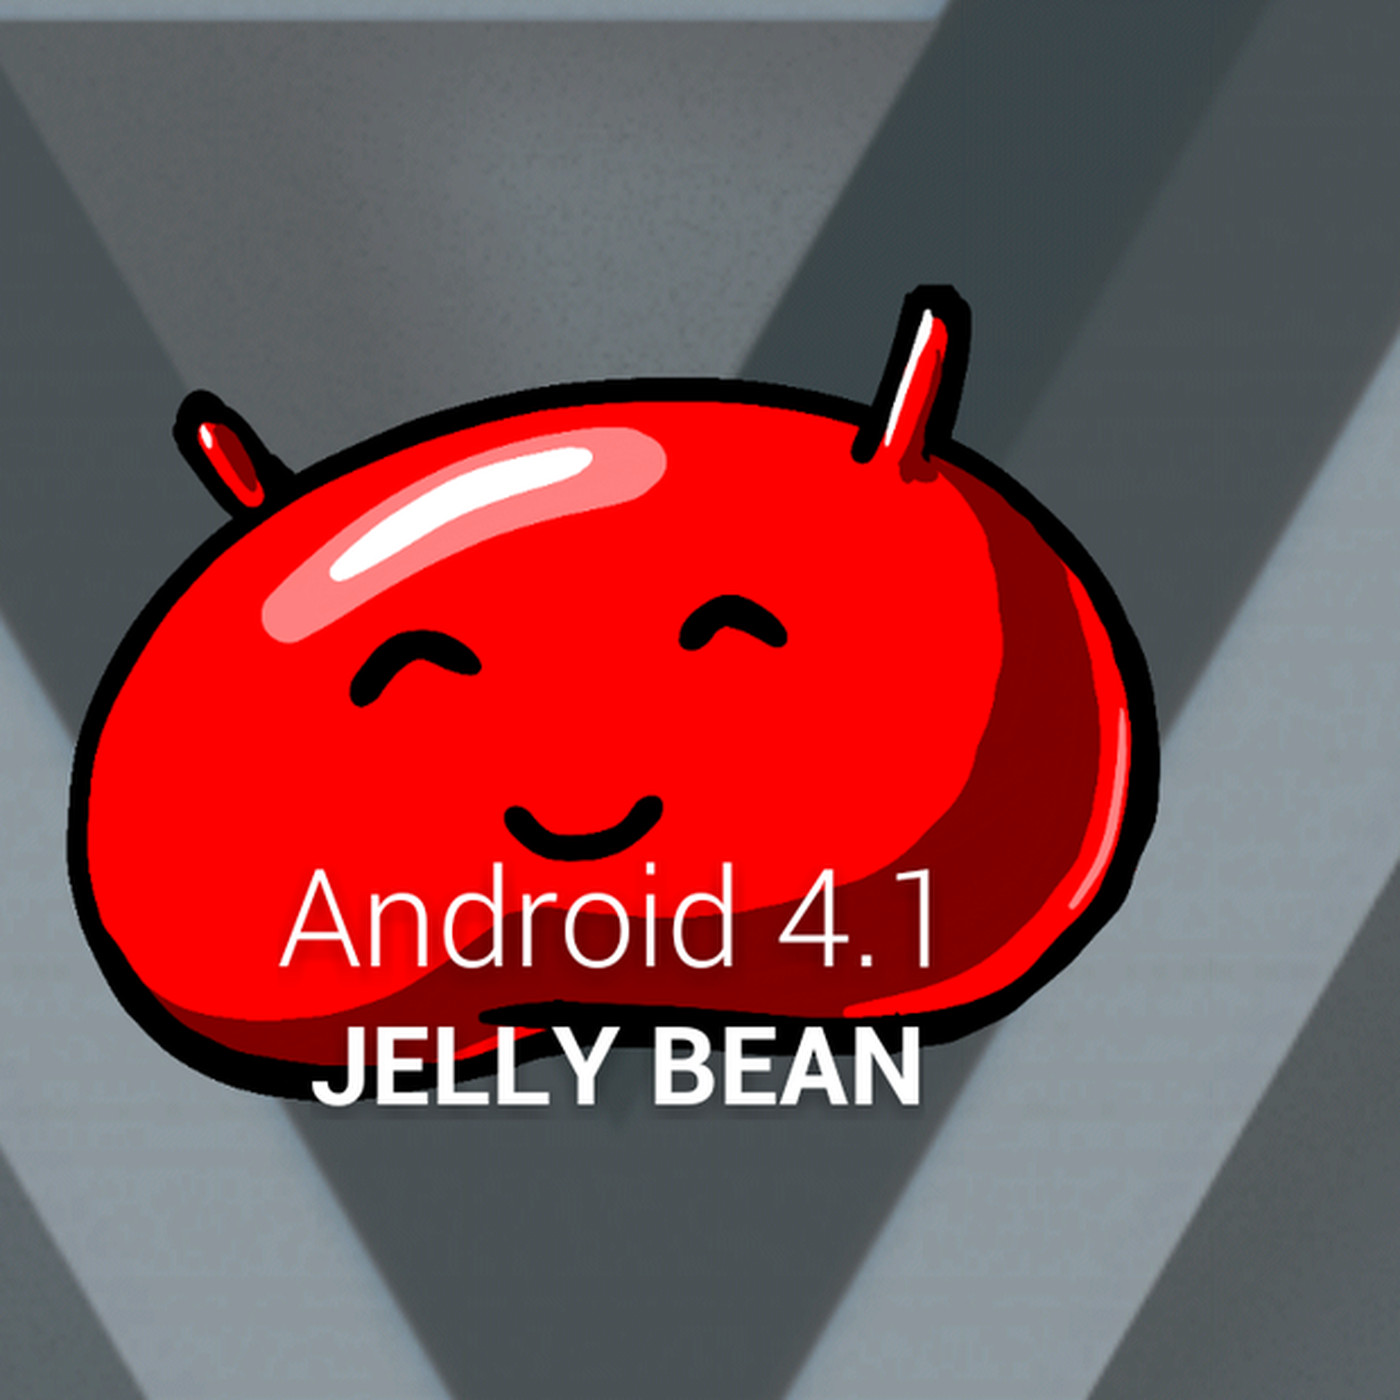 Android 4.1's easter egg inevitably features jelly beans - The Verge